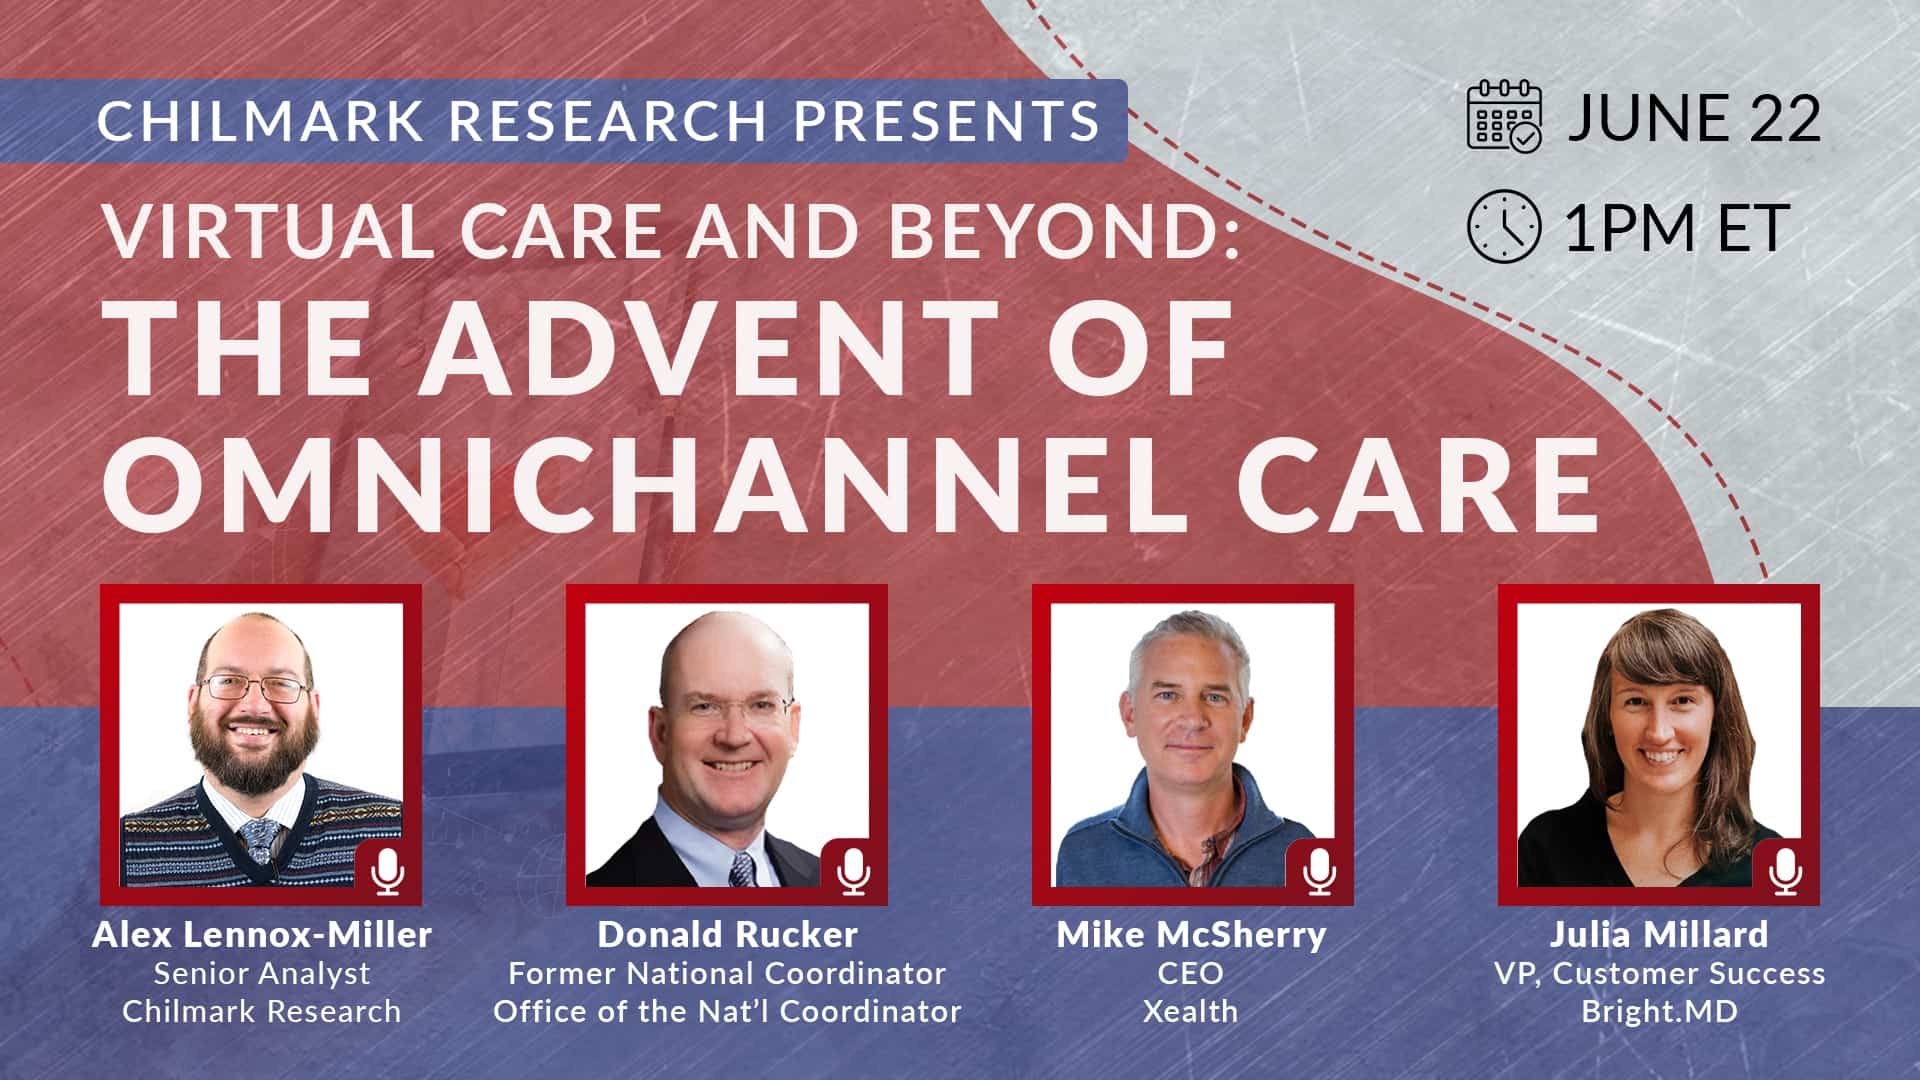 Virtual Care and Beyond: The Advent of Omnichannel Care